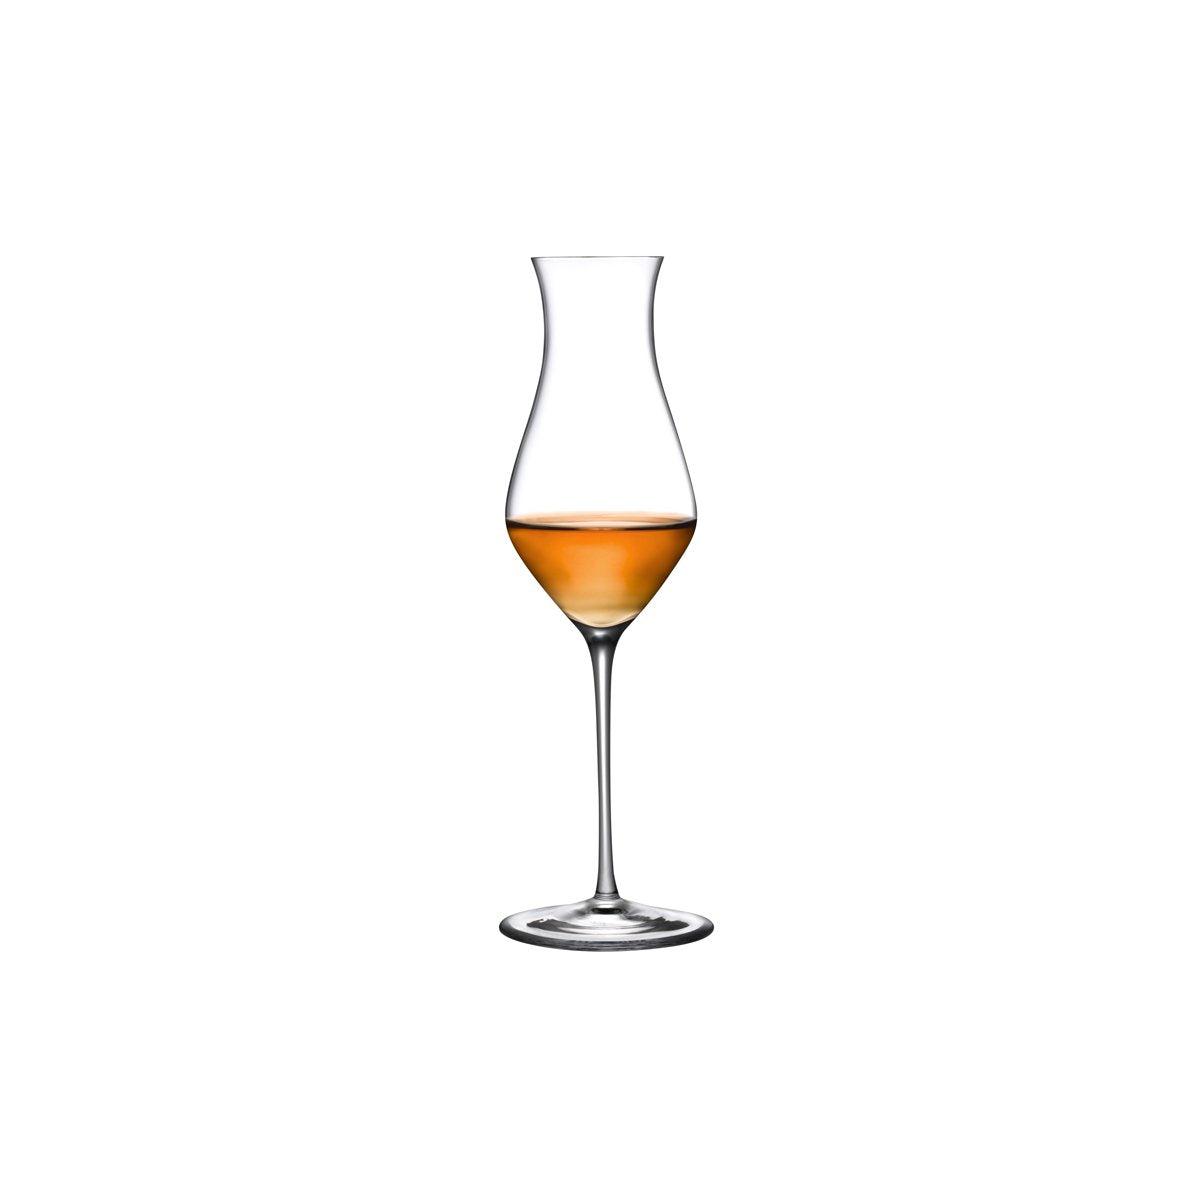 OGGI Whiskey Sipping Double Wall Insulated Glass, Ideal for Whiskey Brandy  Tequila Mescal Old Fashio…See more OGGI Whiskey Sipping Double Wall